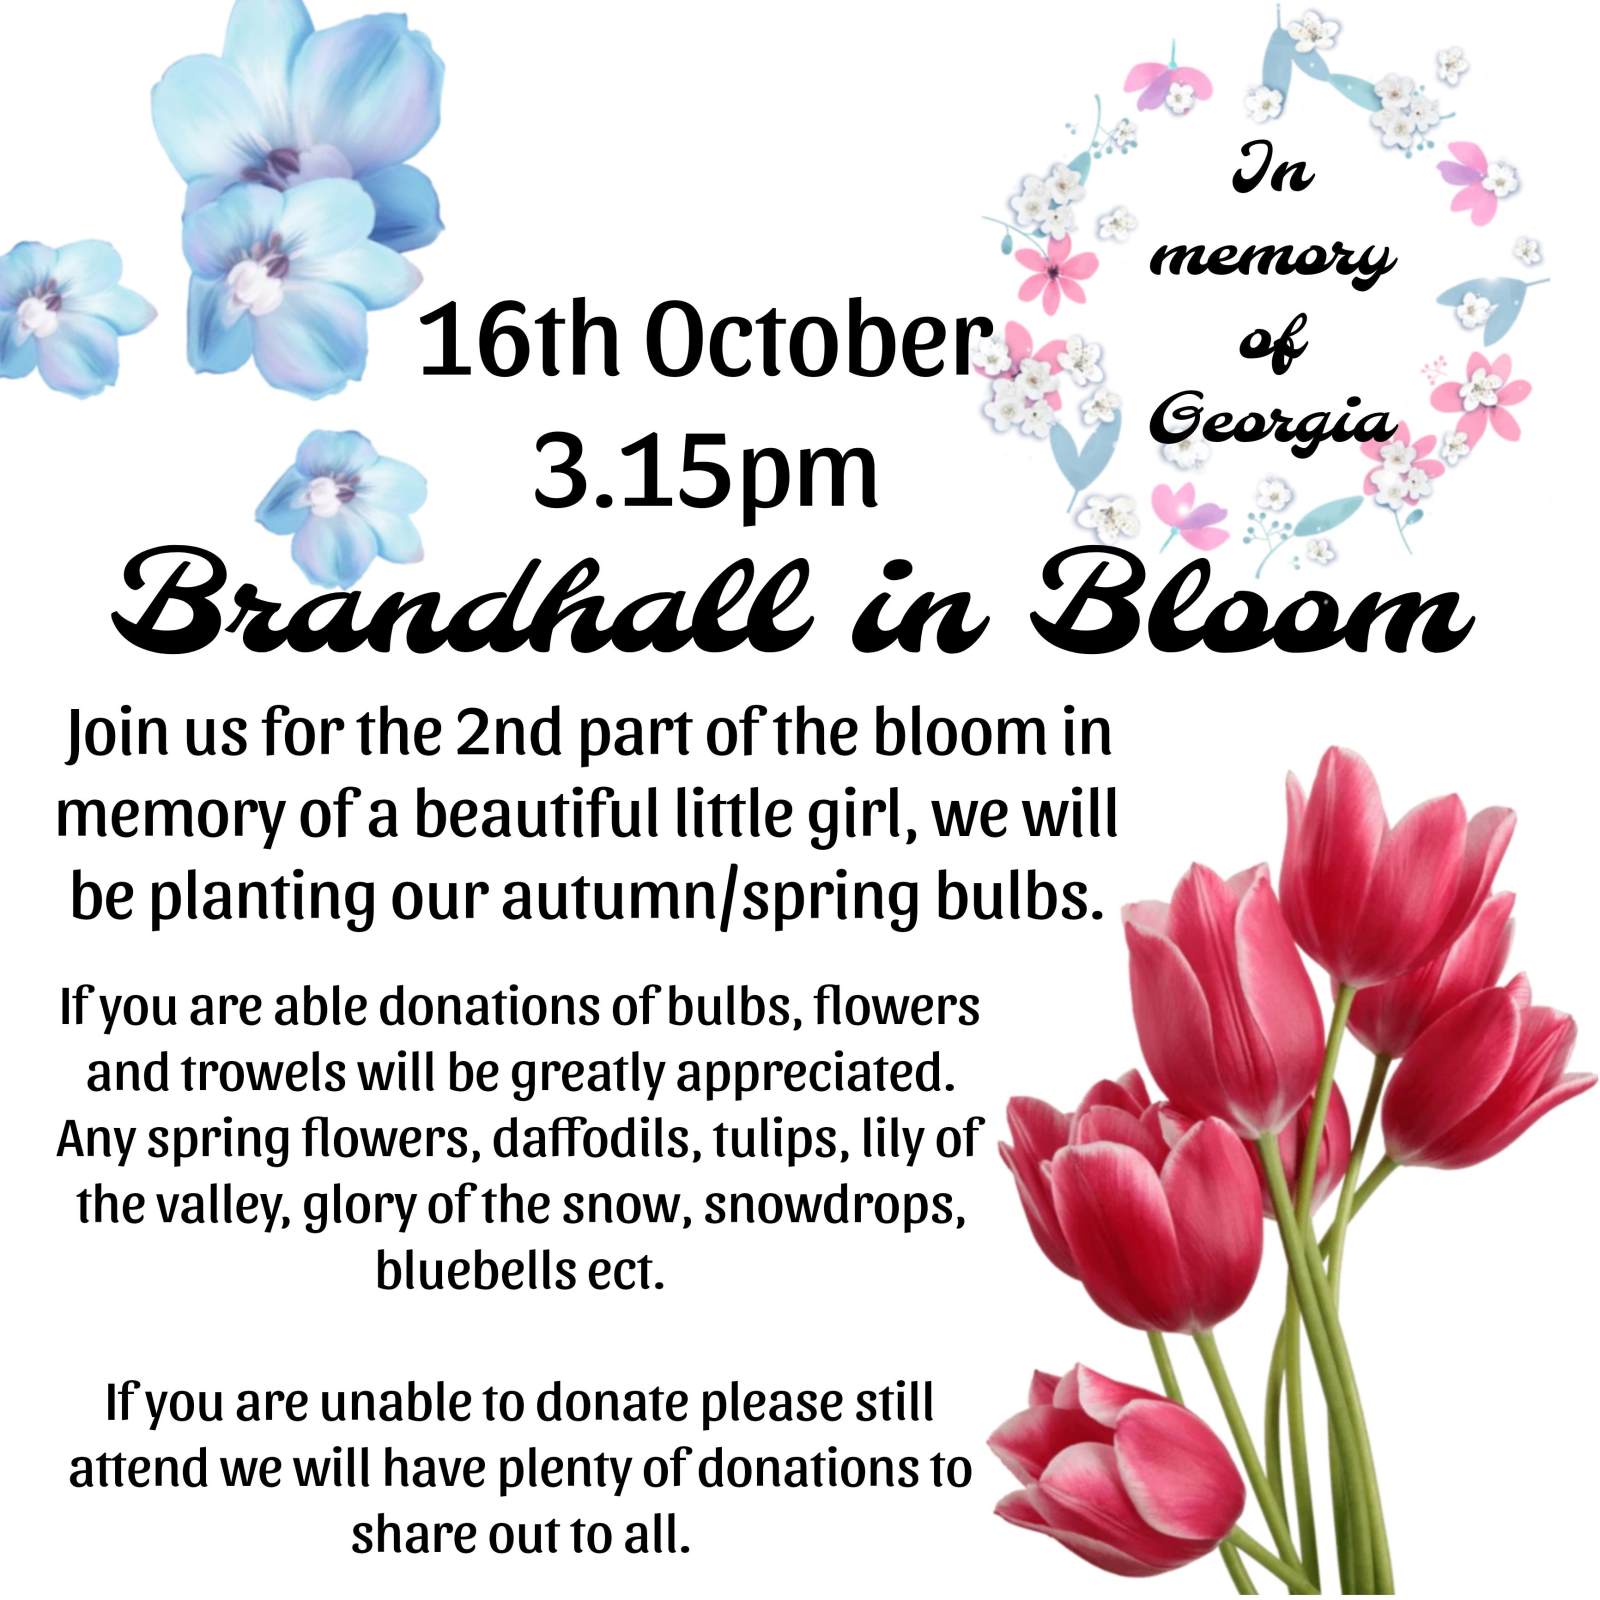 Brandhall in Bloom